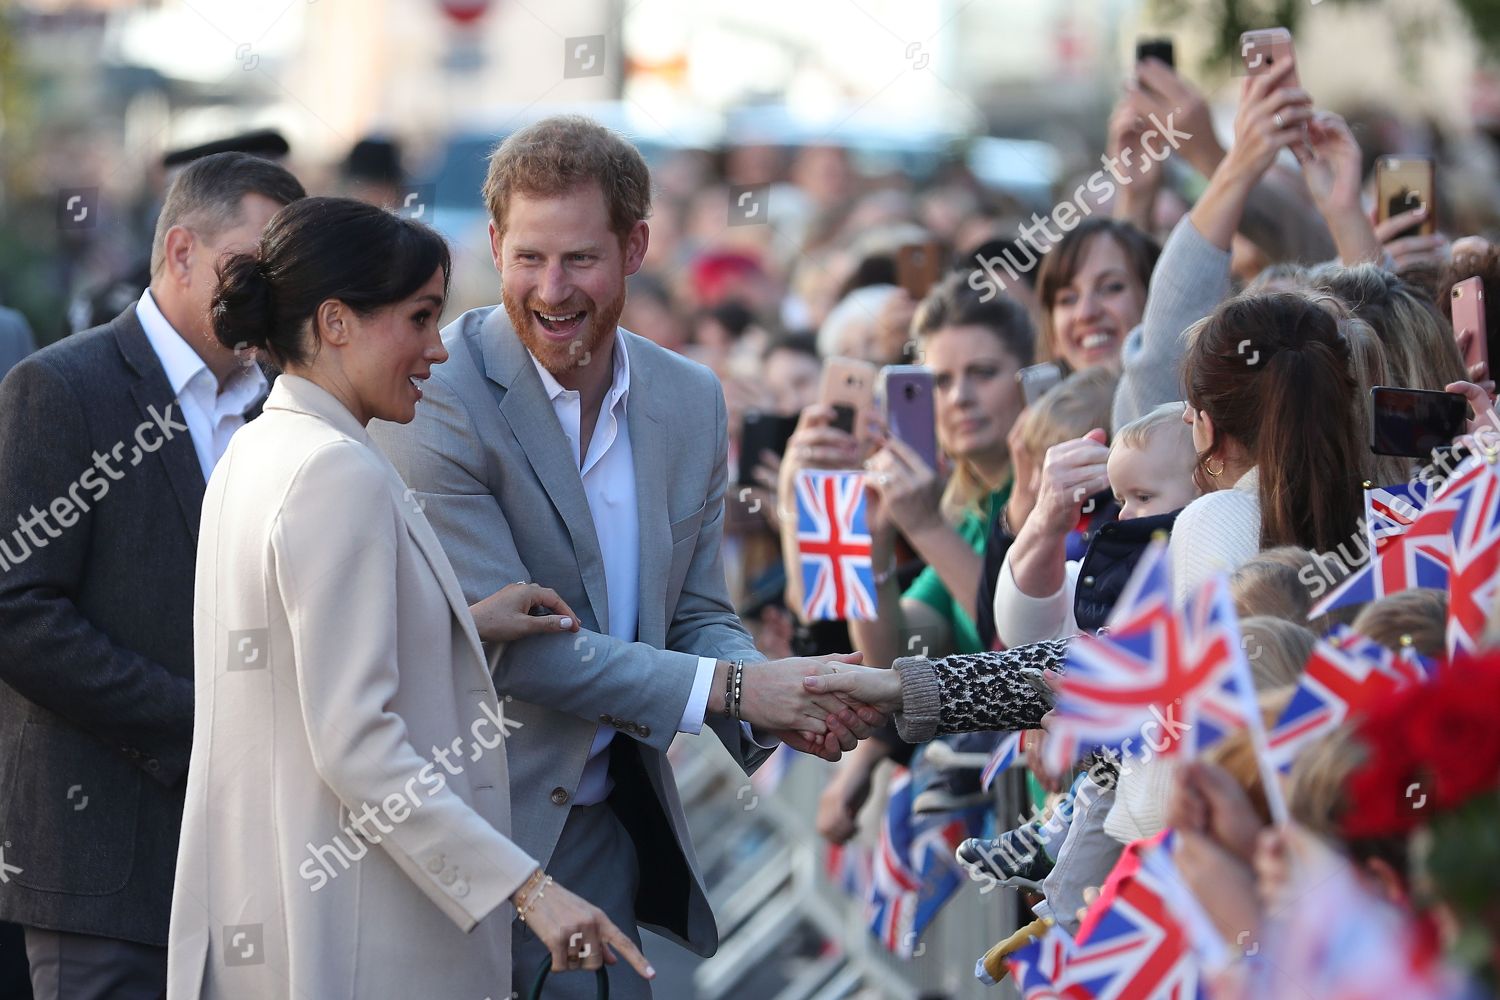 prince-harry-and-meghan-duchess-of-sussex-visit-to-sussex-uk-shutterstock-editorial-9912829n.jpg